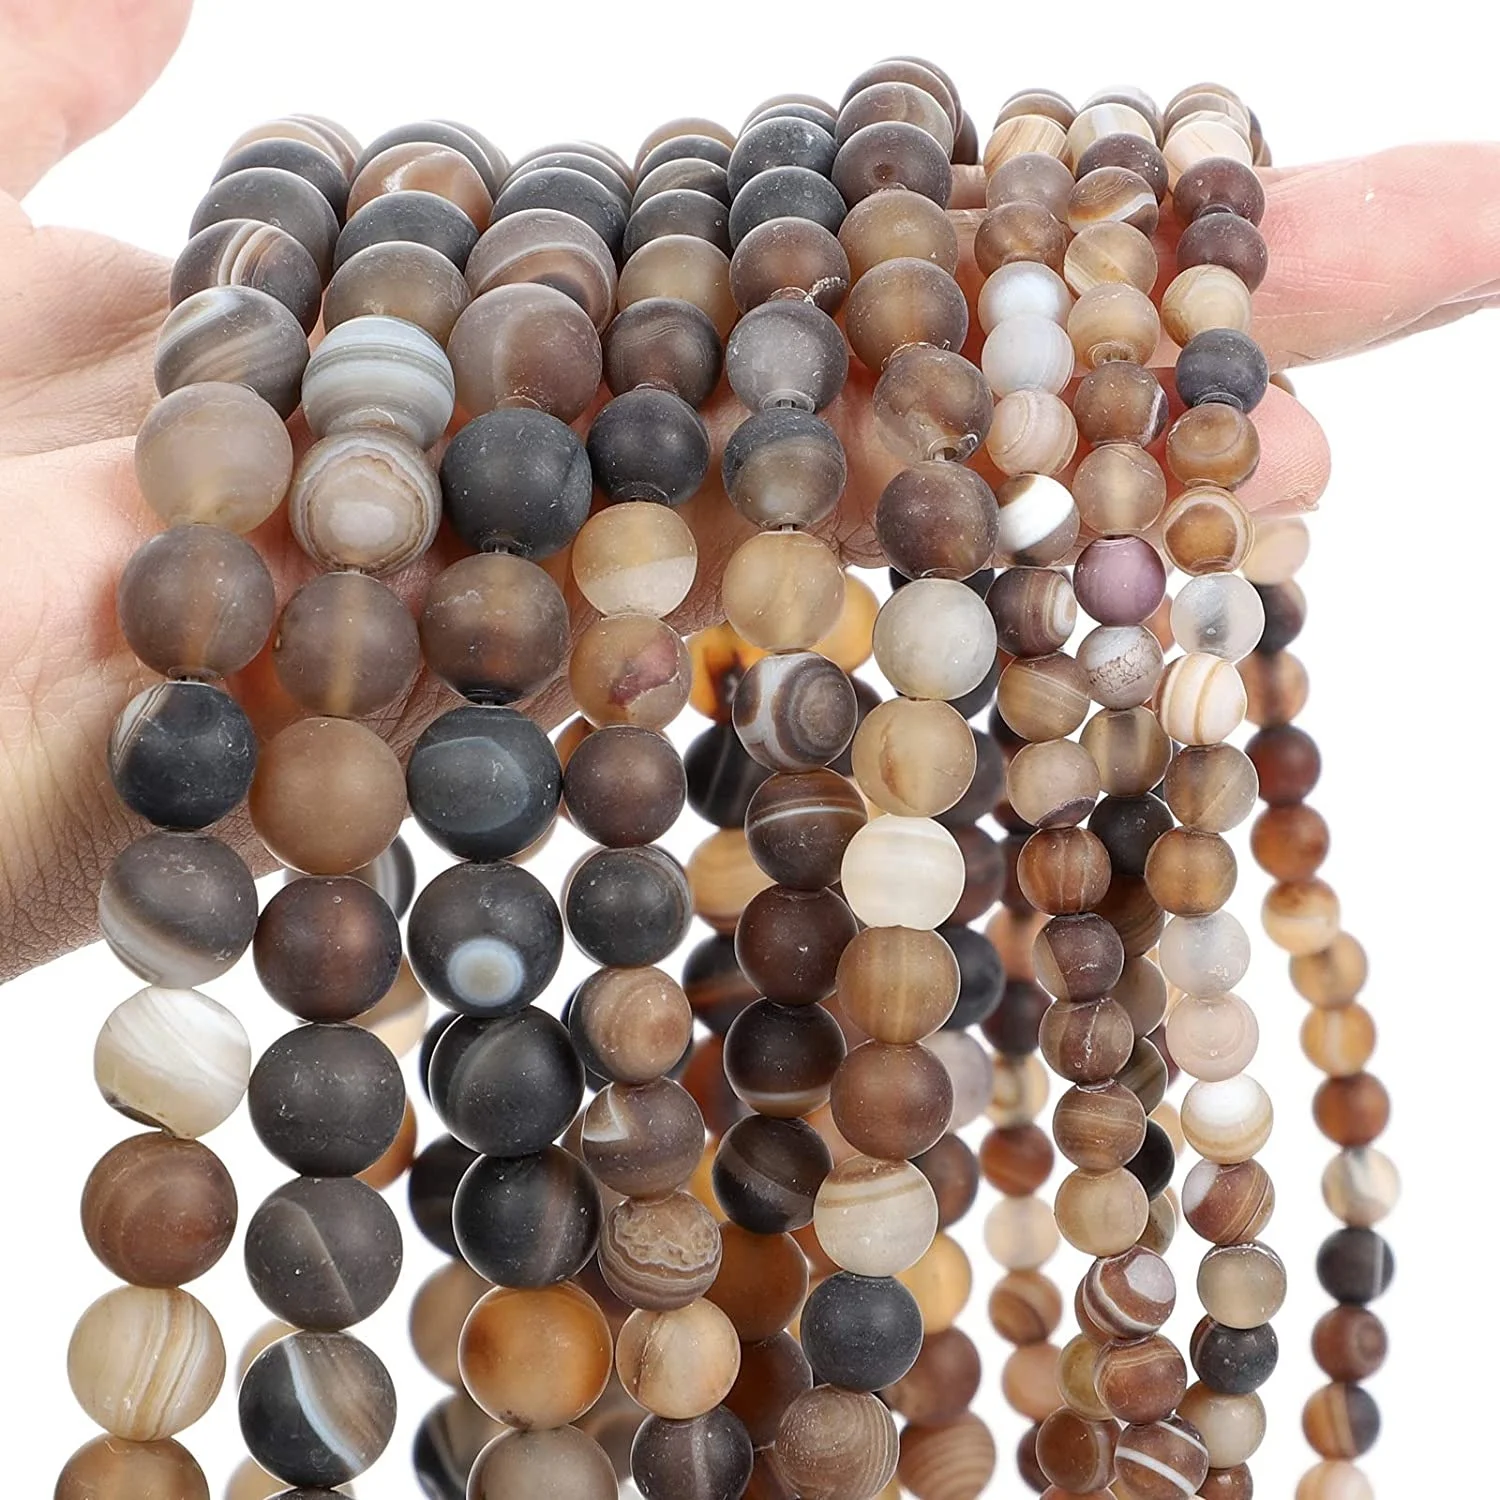 

Natural Stone Beads Mattte Grey Persian Agate,8mm Polished Round Smooth Gemstone Beads,Beads for Jewelry Making 15 Inch